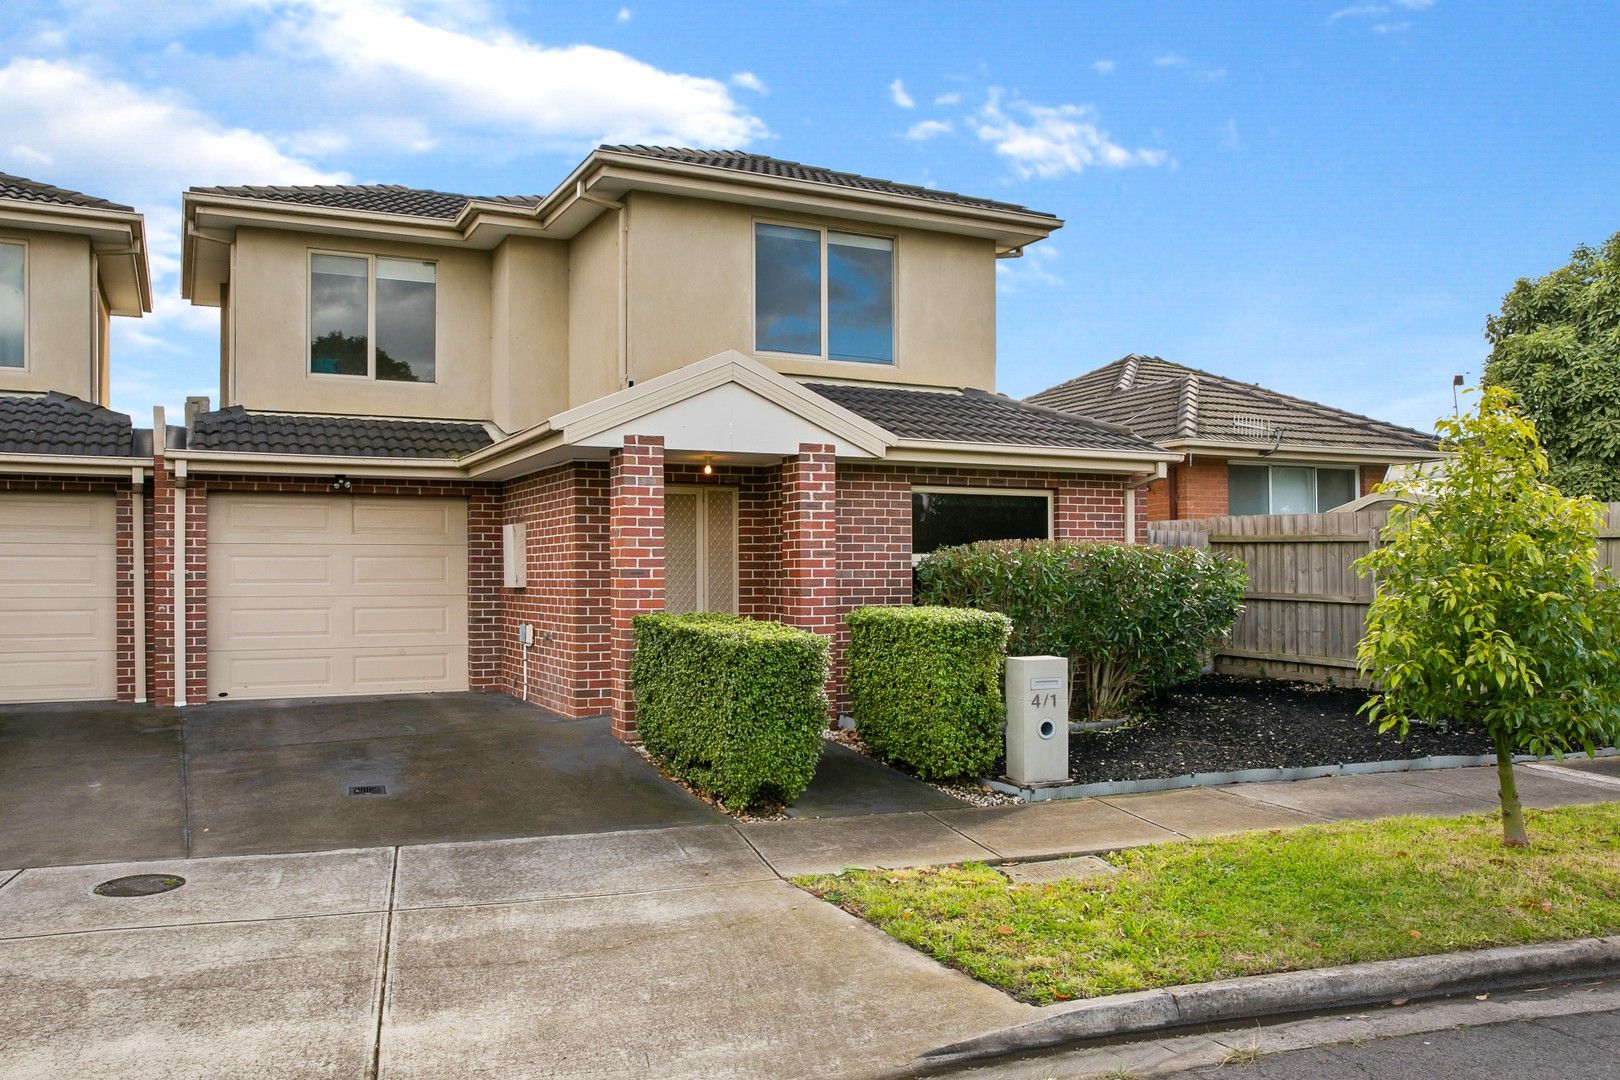 3 bedrooms Townhouse in 4/1 Marlo Court BROADMEADOWS VIC, 3047